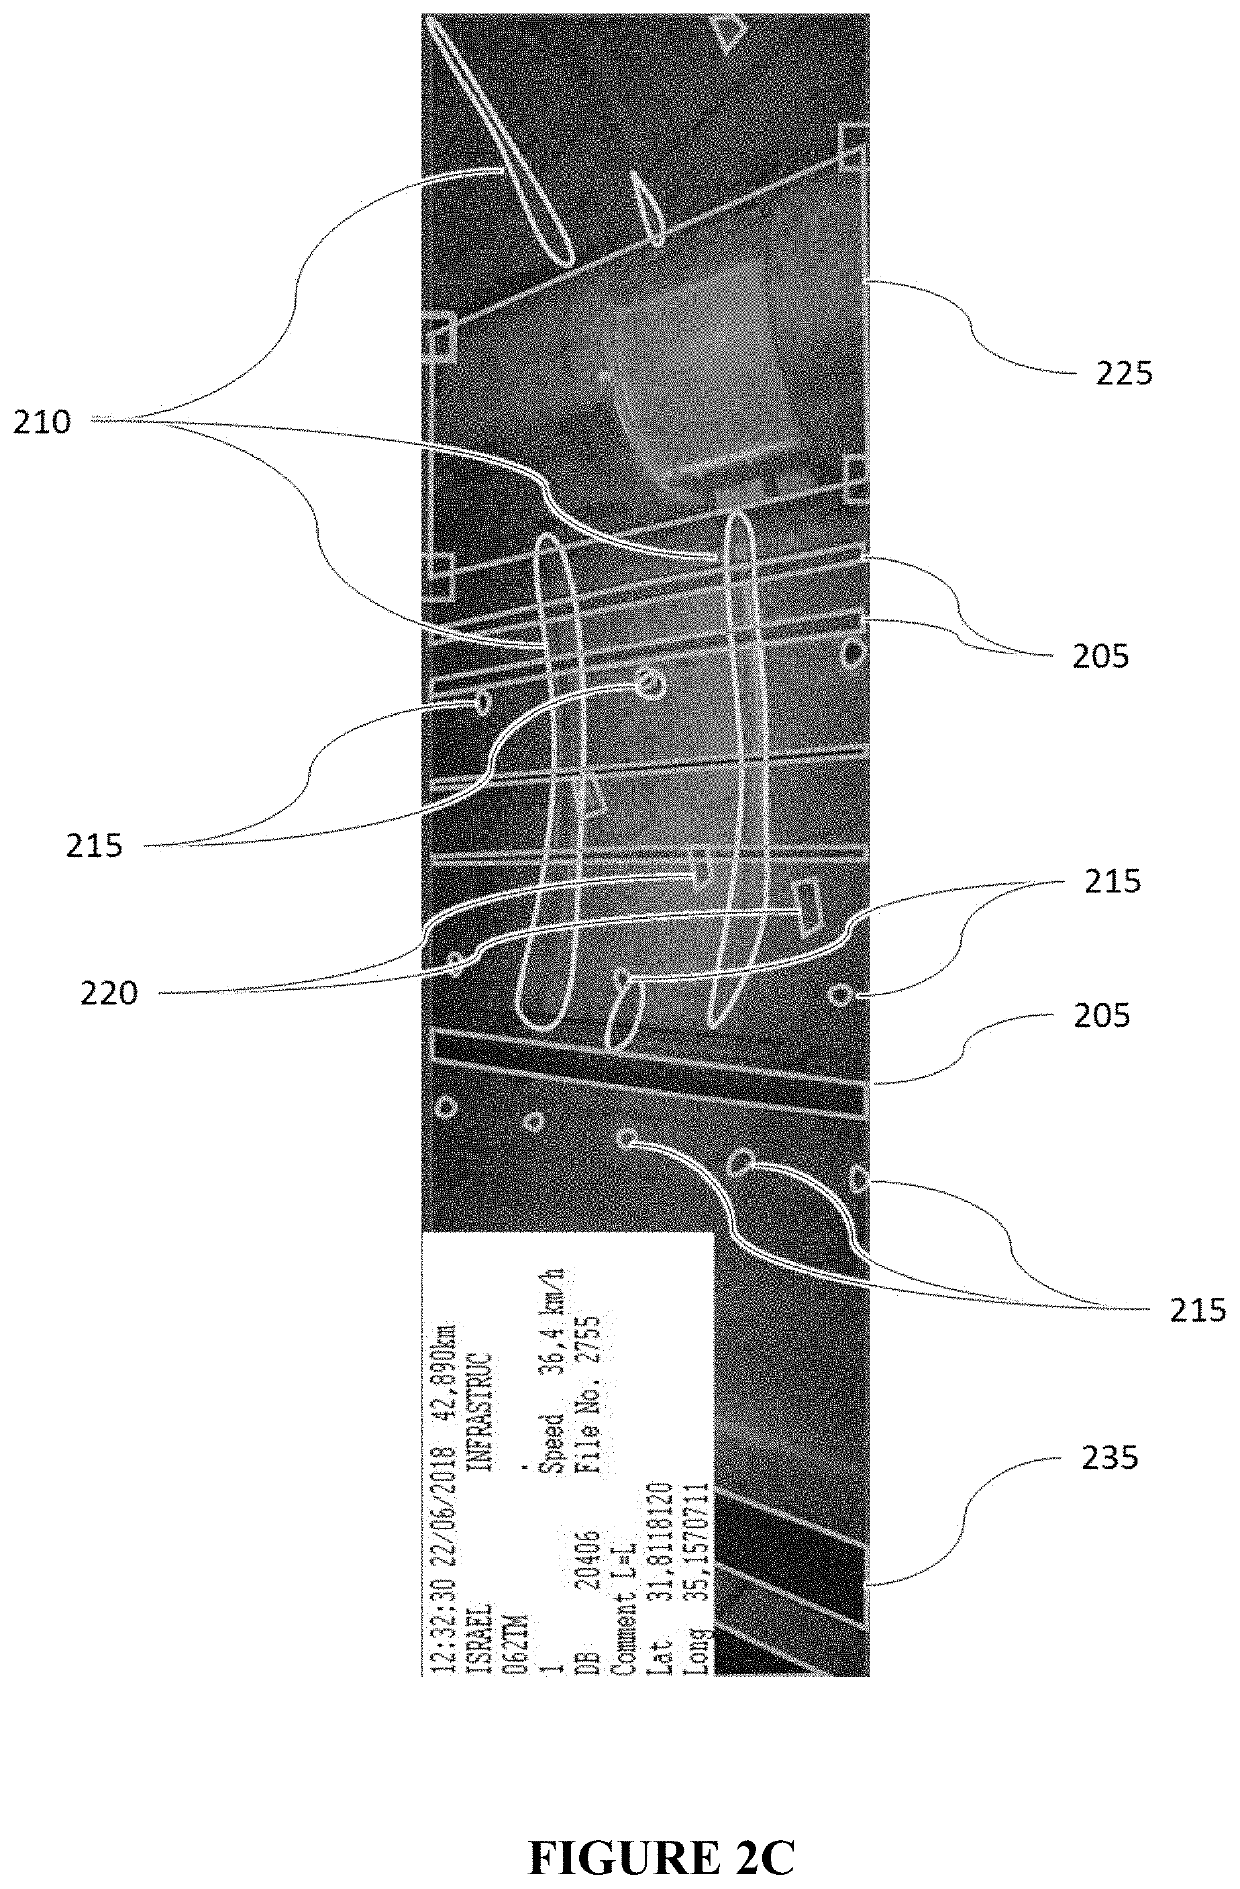 System and method for early identification and monitoring of defects in transportation infrastructure